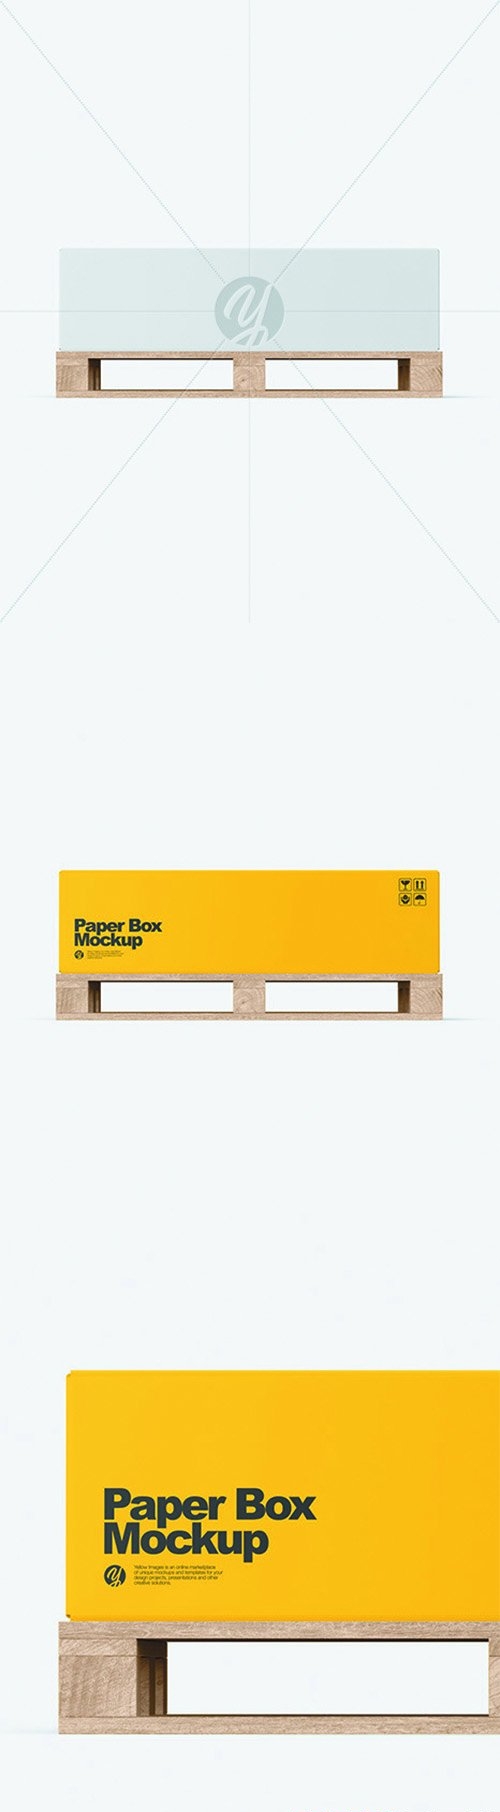 Wooden Pallet With Paper Box Mockup 66355